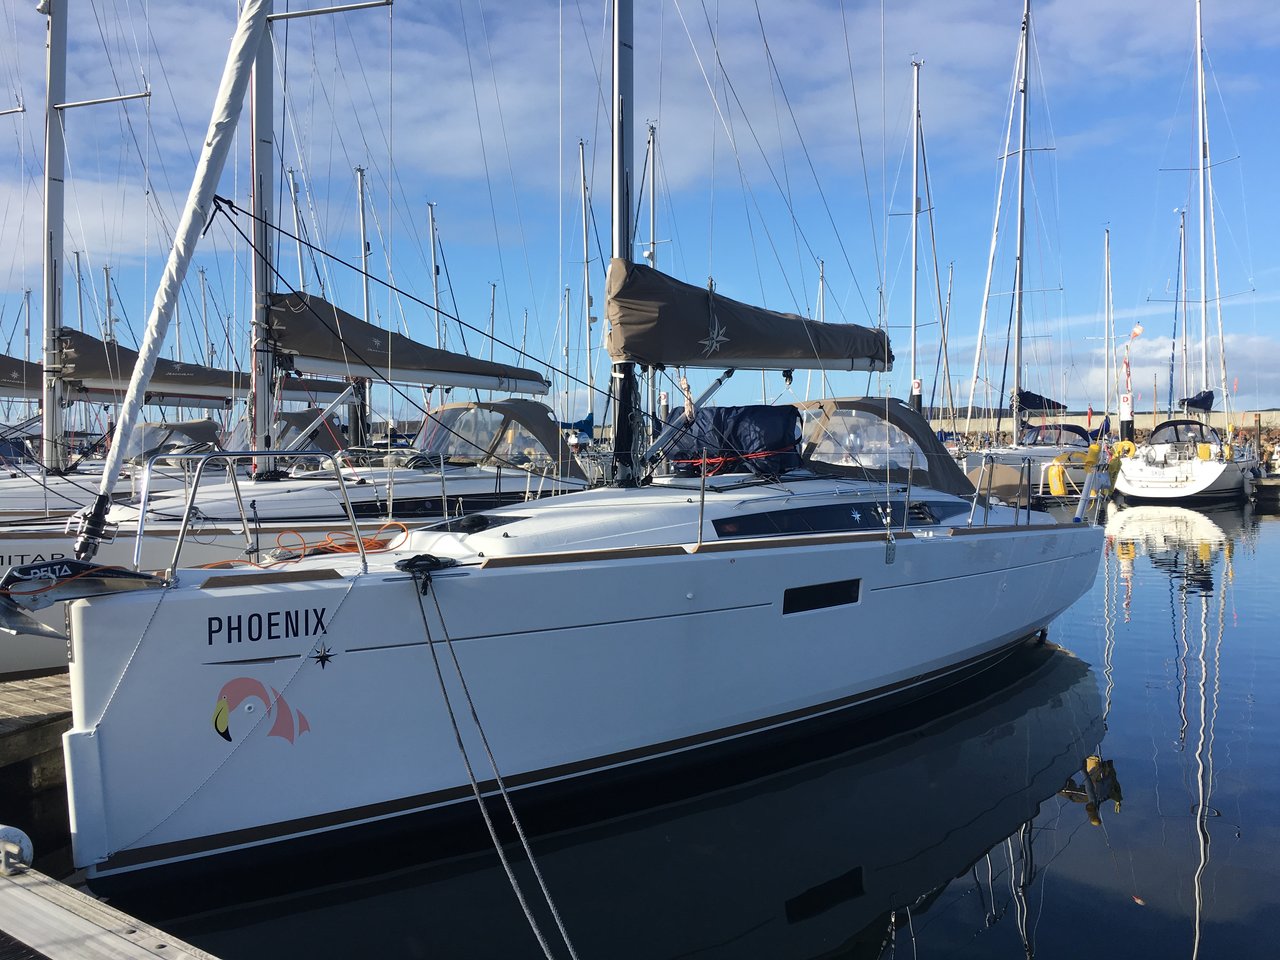 Sun Odyssey 349 - Yacht Charter Largs & Boat hire in United Kingdom Scotland Firth of Clyde Largs Largs Yacht Haven 1